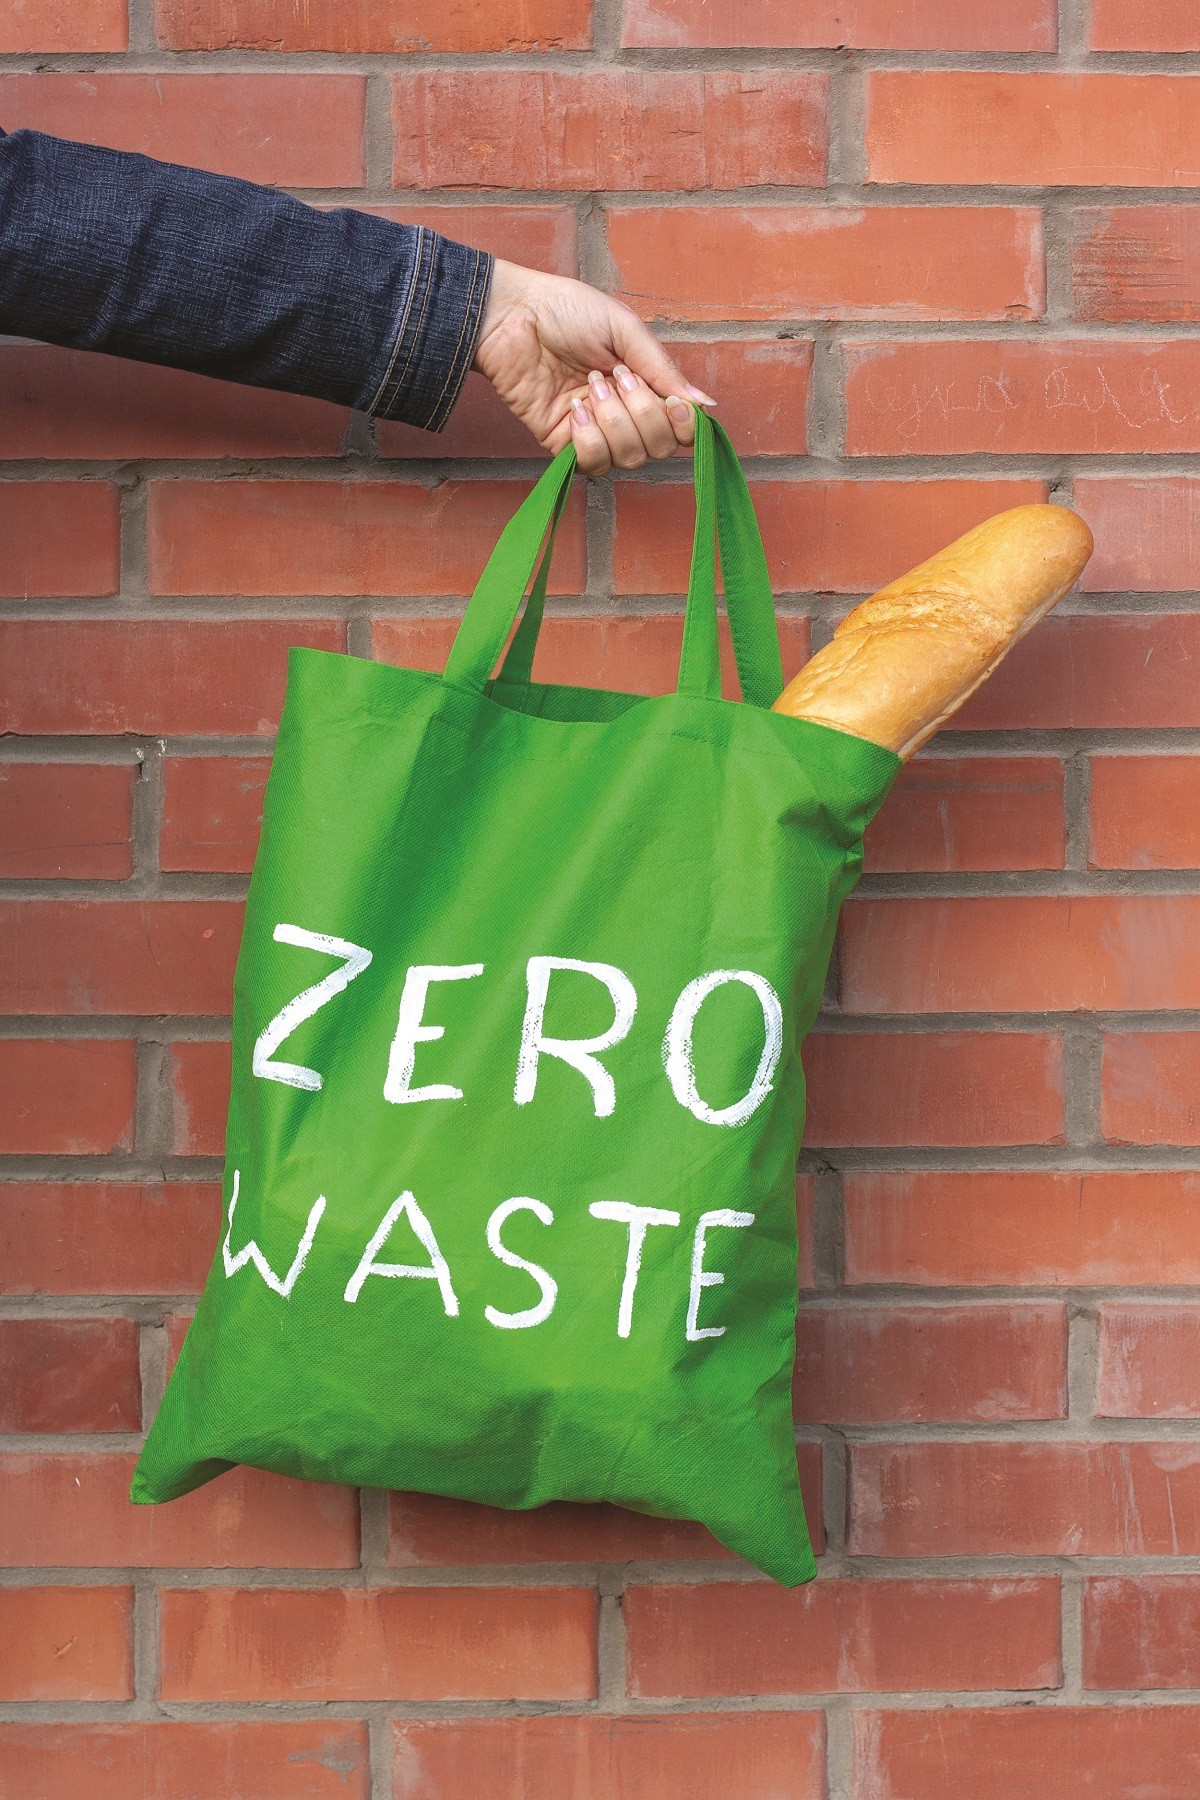 Green eco bag with a white inscription zero waste which the hand holds on a background of a brick wall.